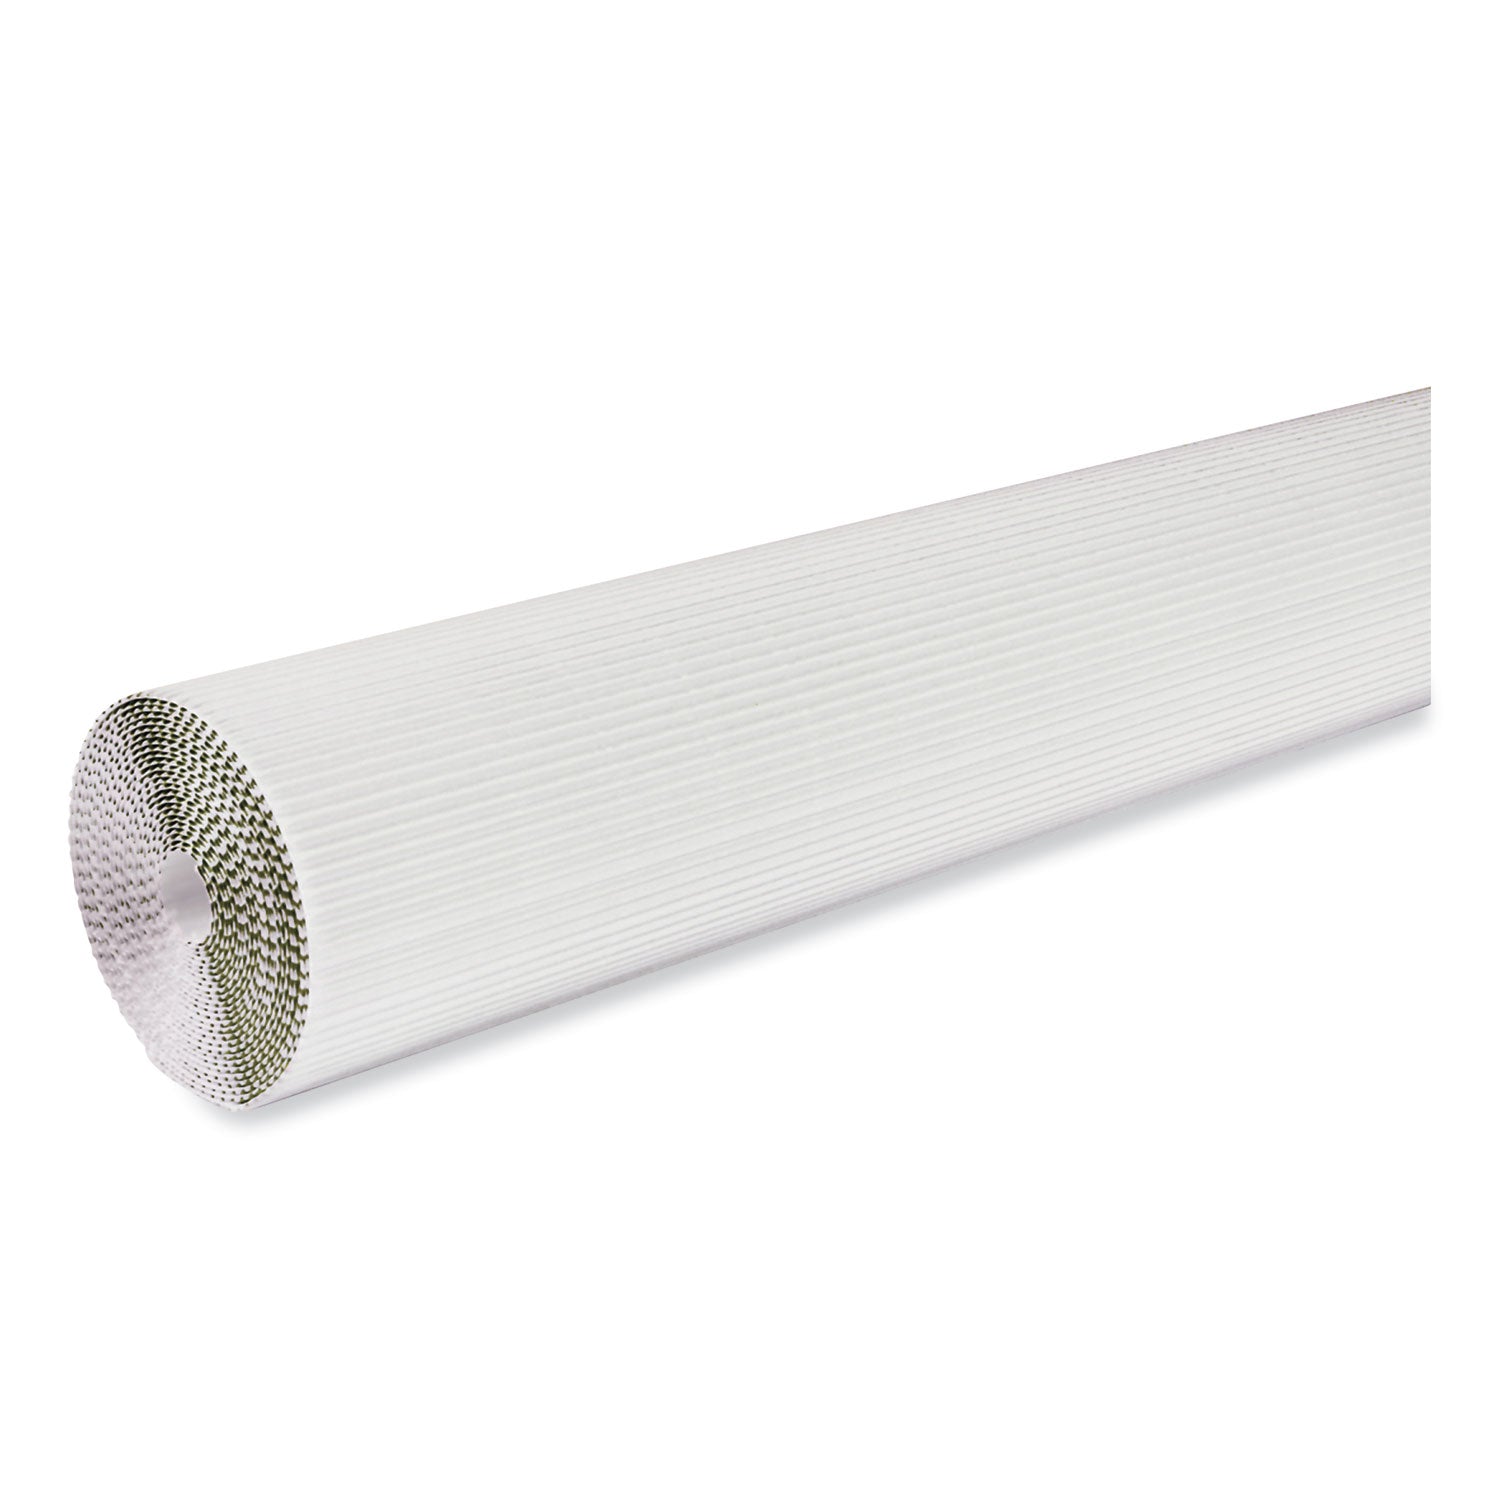 corobuff-corrugated-paper-roll-48-x-25-ft-white_pac0011011 - 2